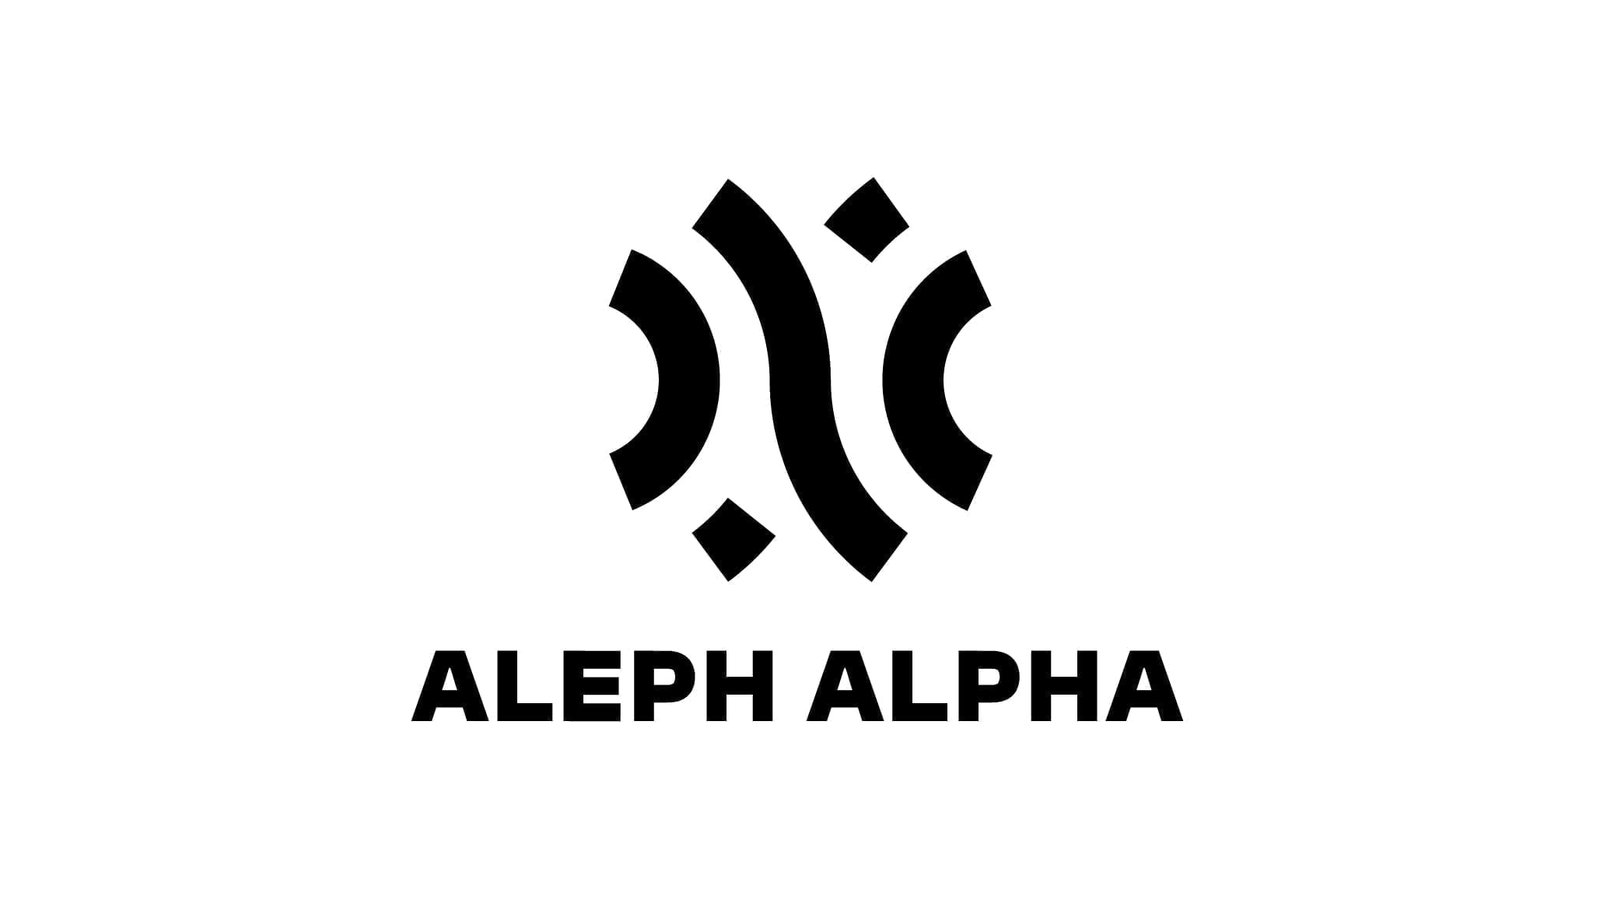 German AI startup Aleph Alpha breaks down $500 million investment package